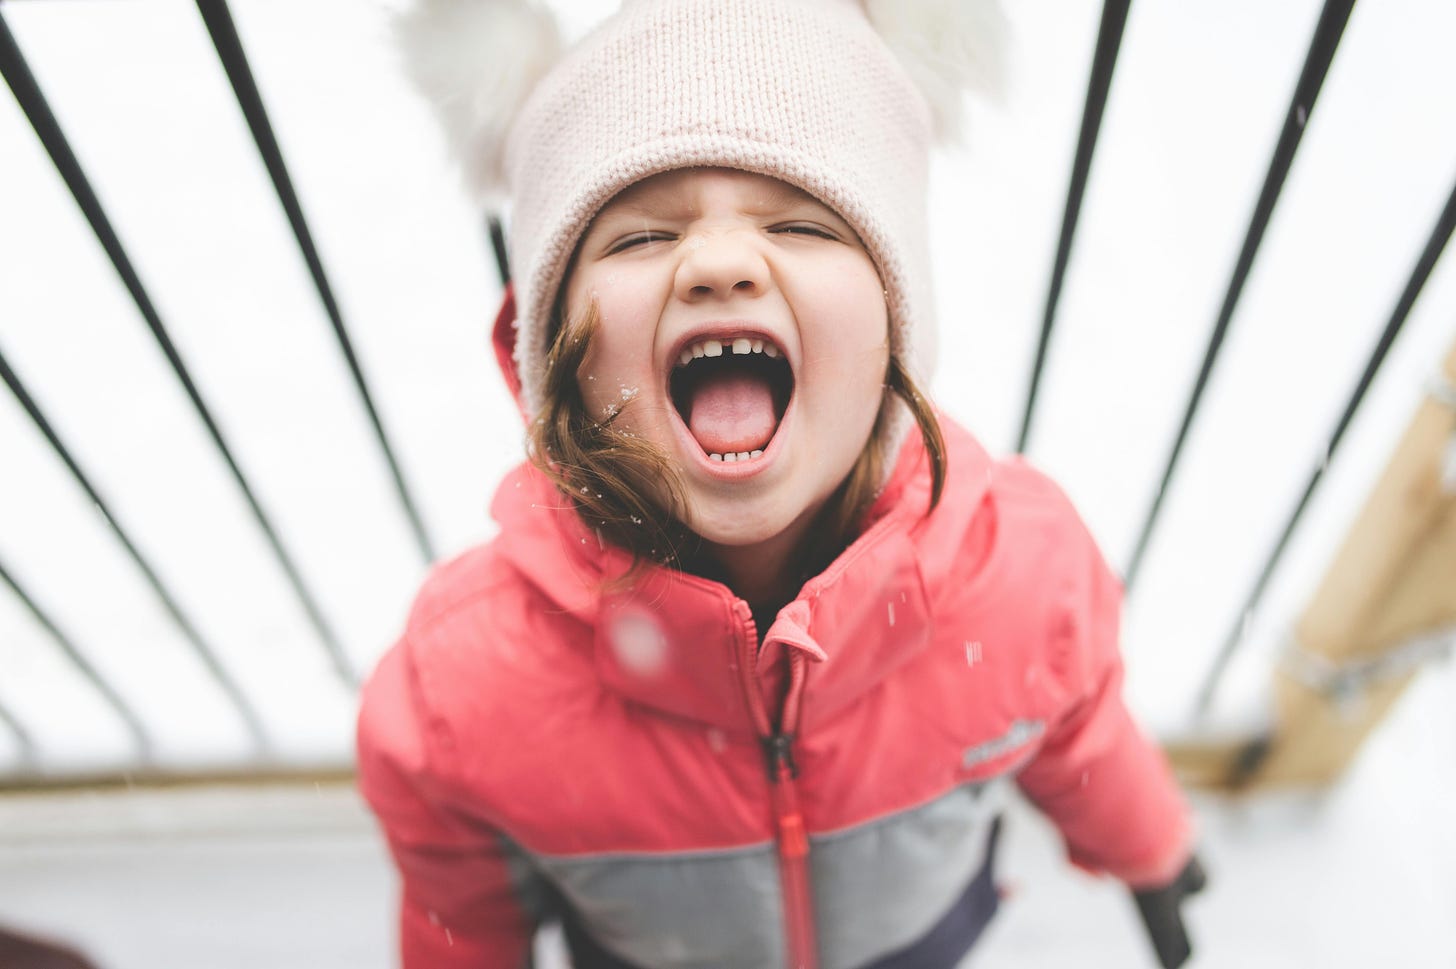 Young girl white hat red jacket screaming tantrum